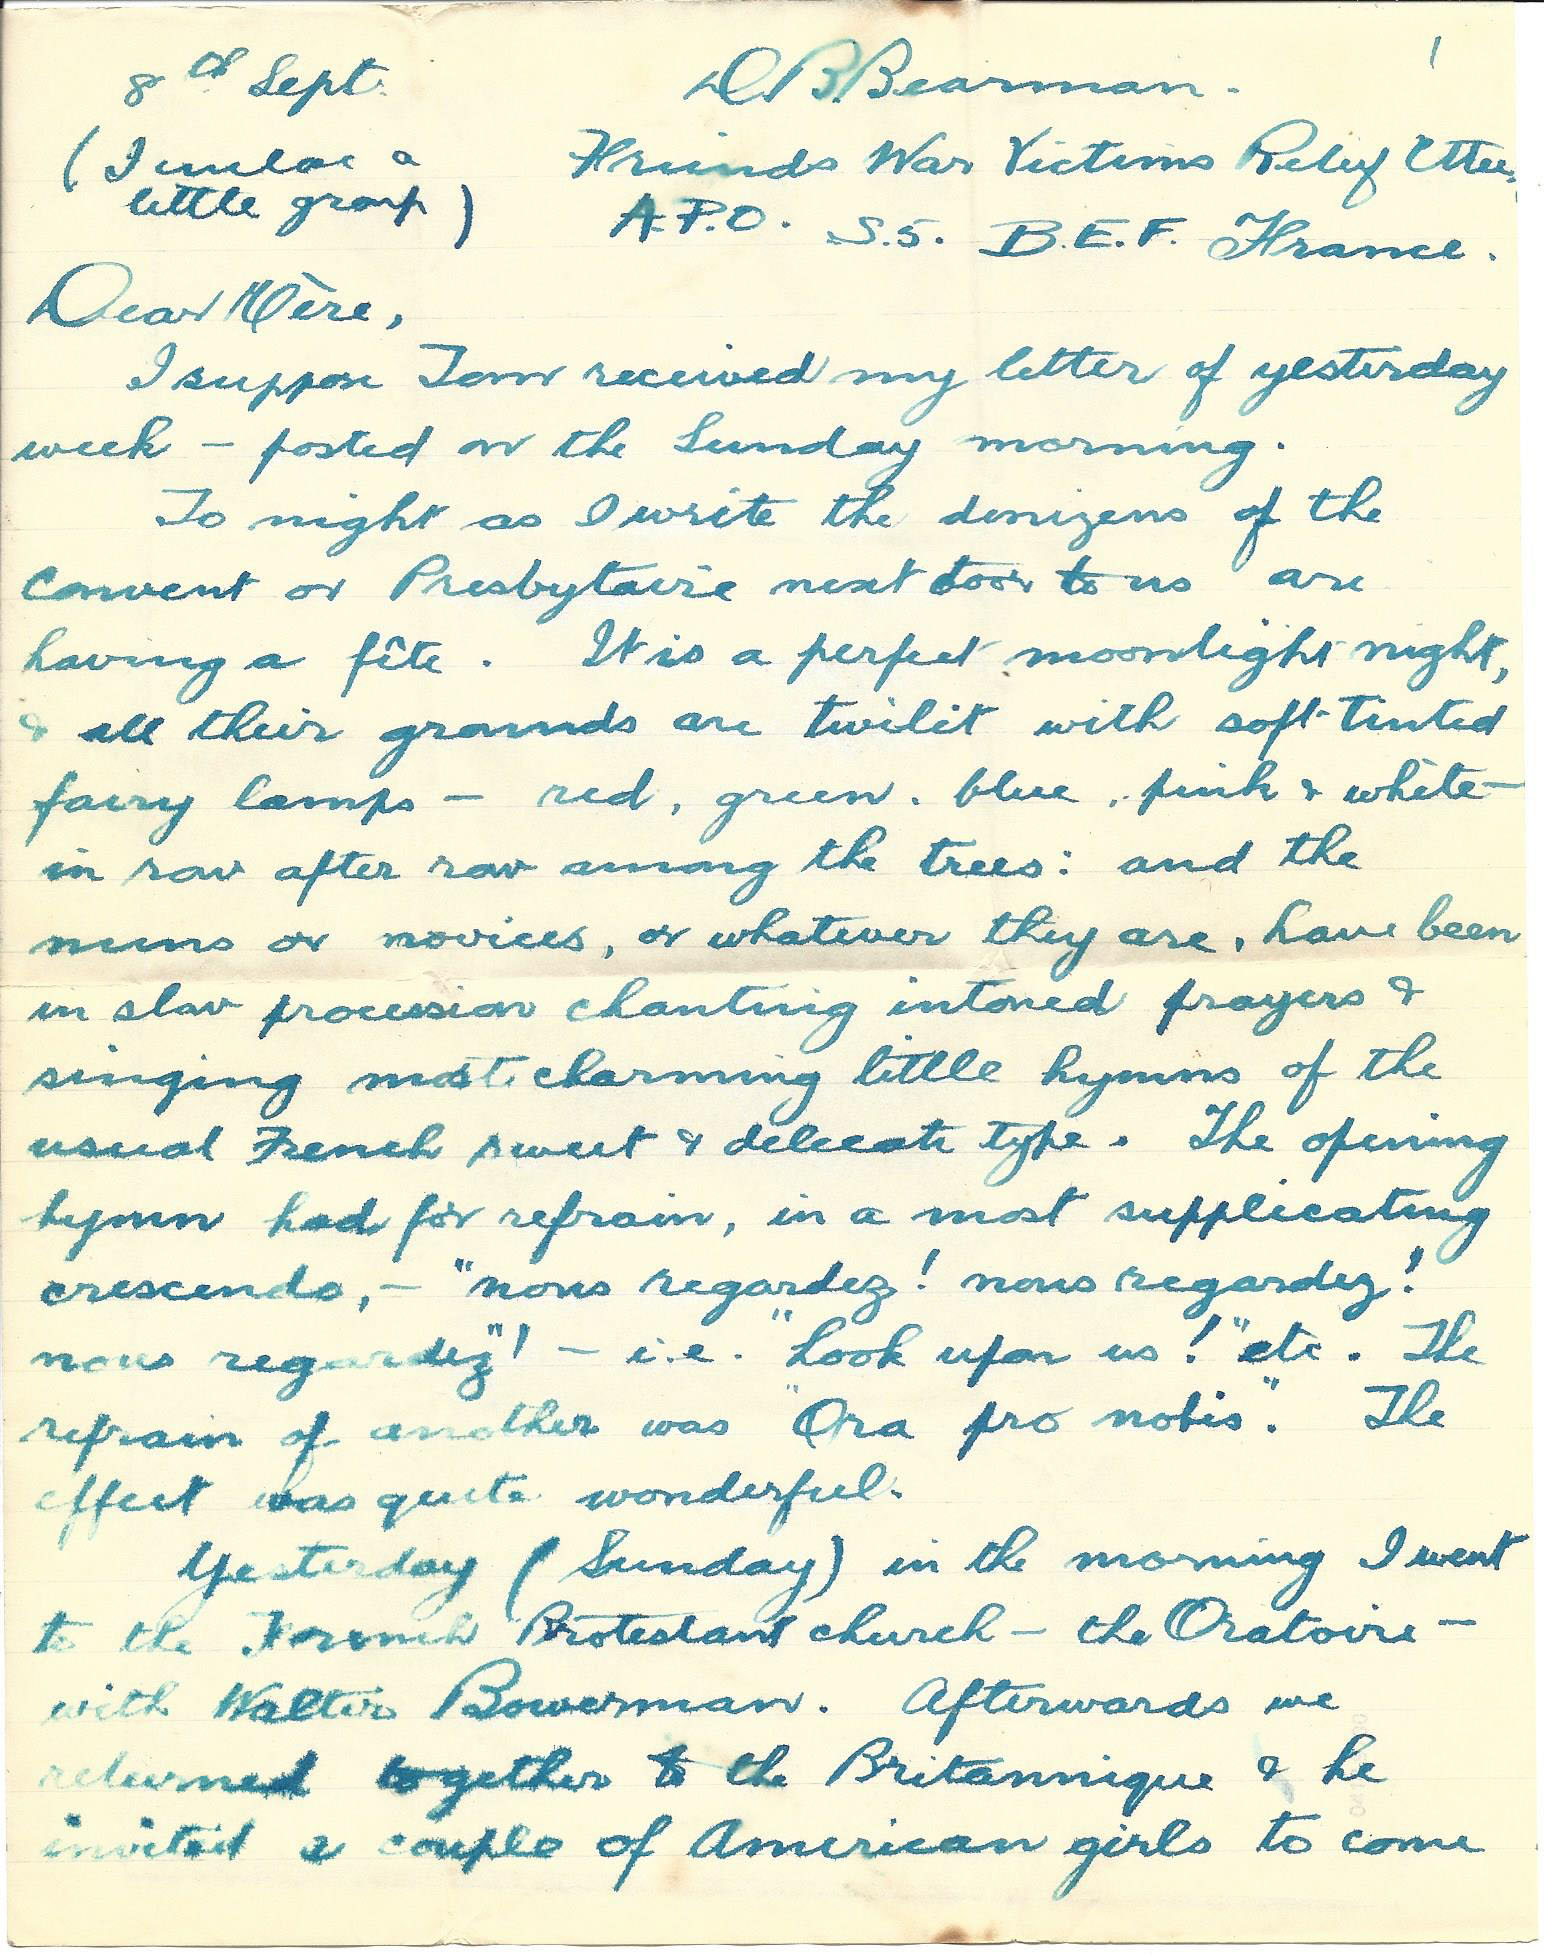 1919-09-08 p1 Donald Bearman letter to his mother